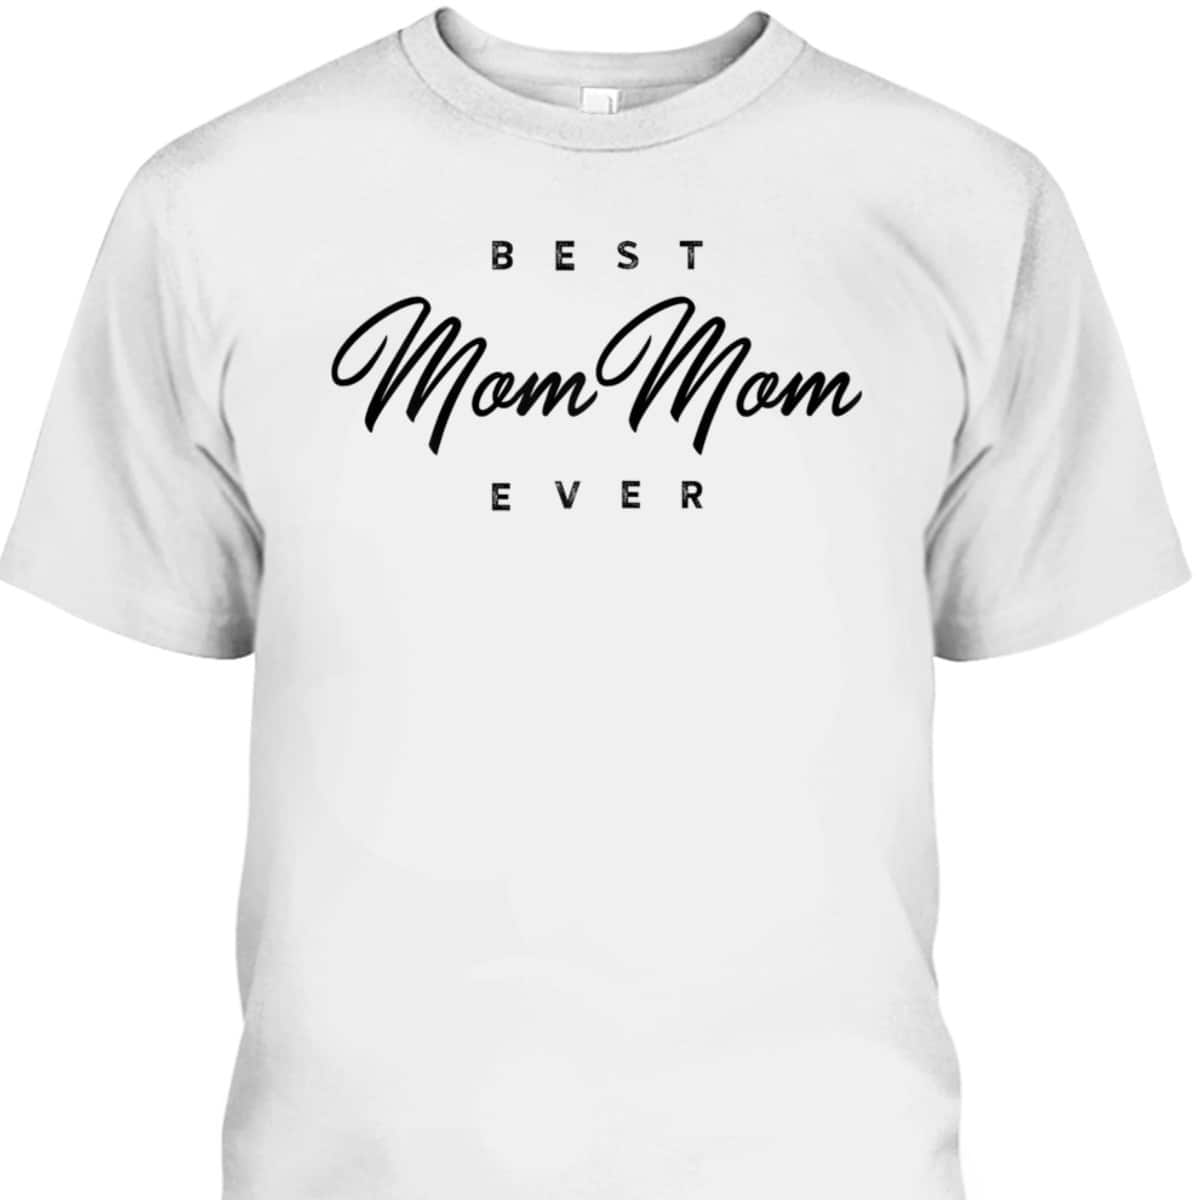 Mother's Day T-Shirt Best MomMom Ever